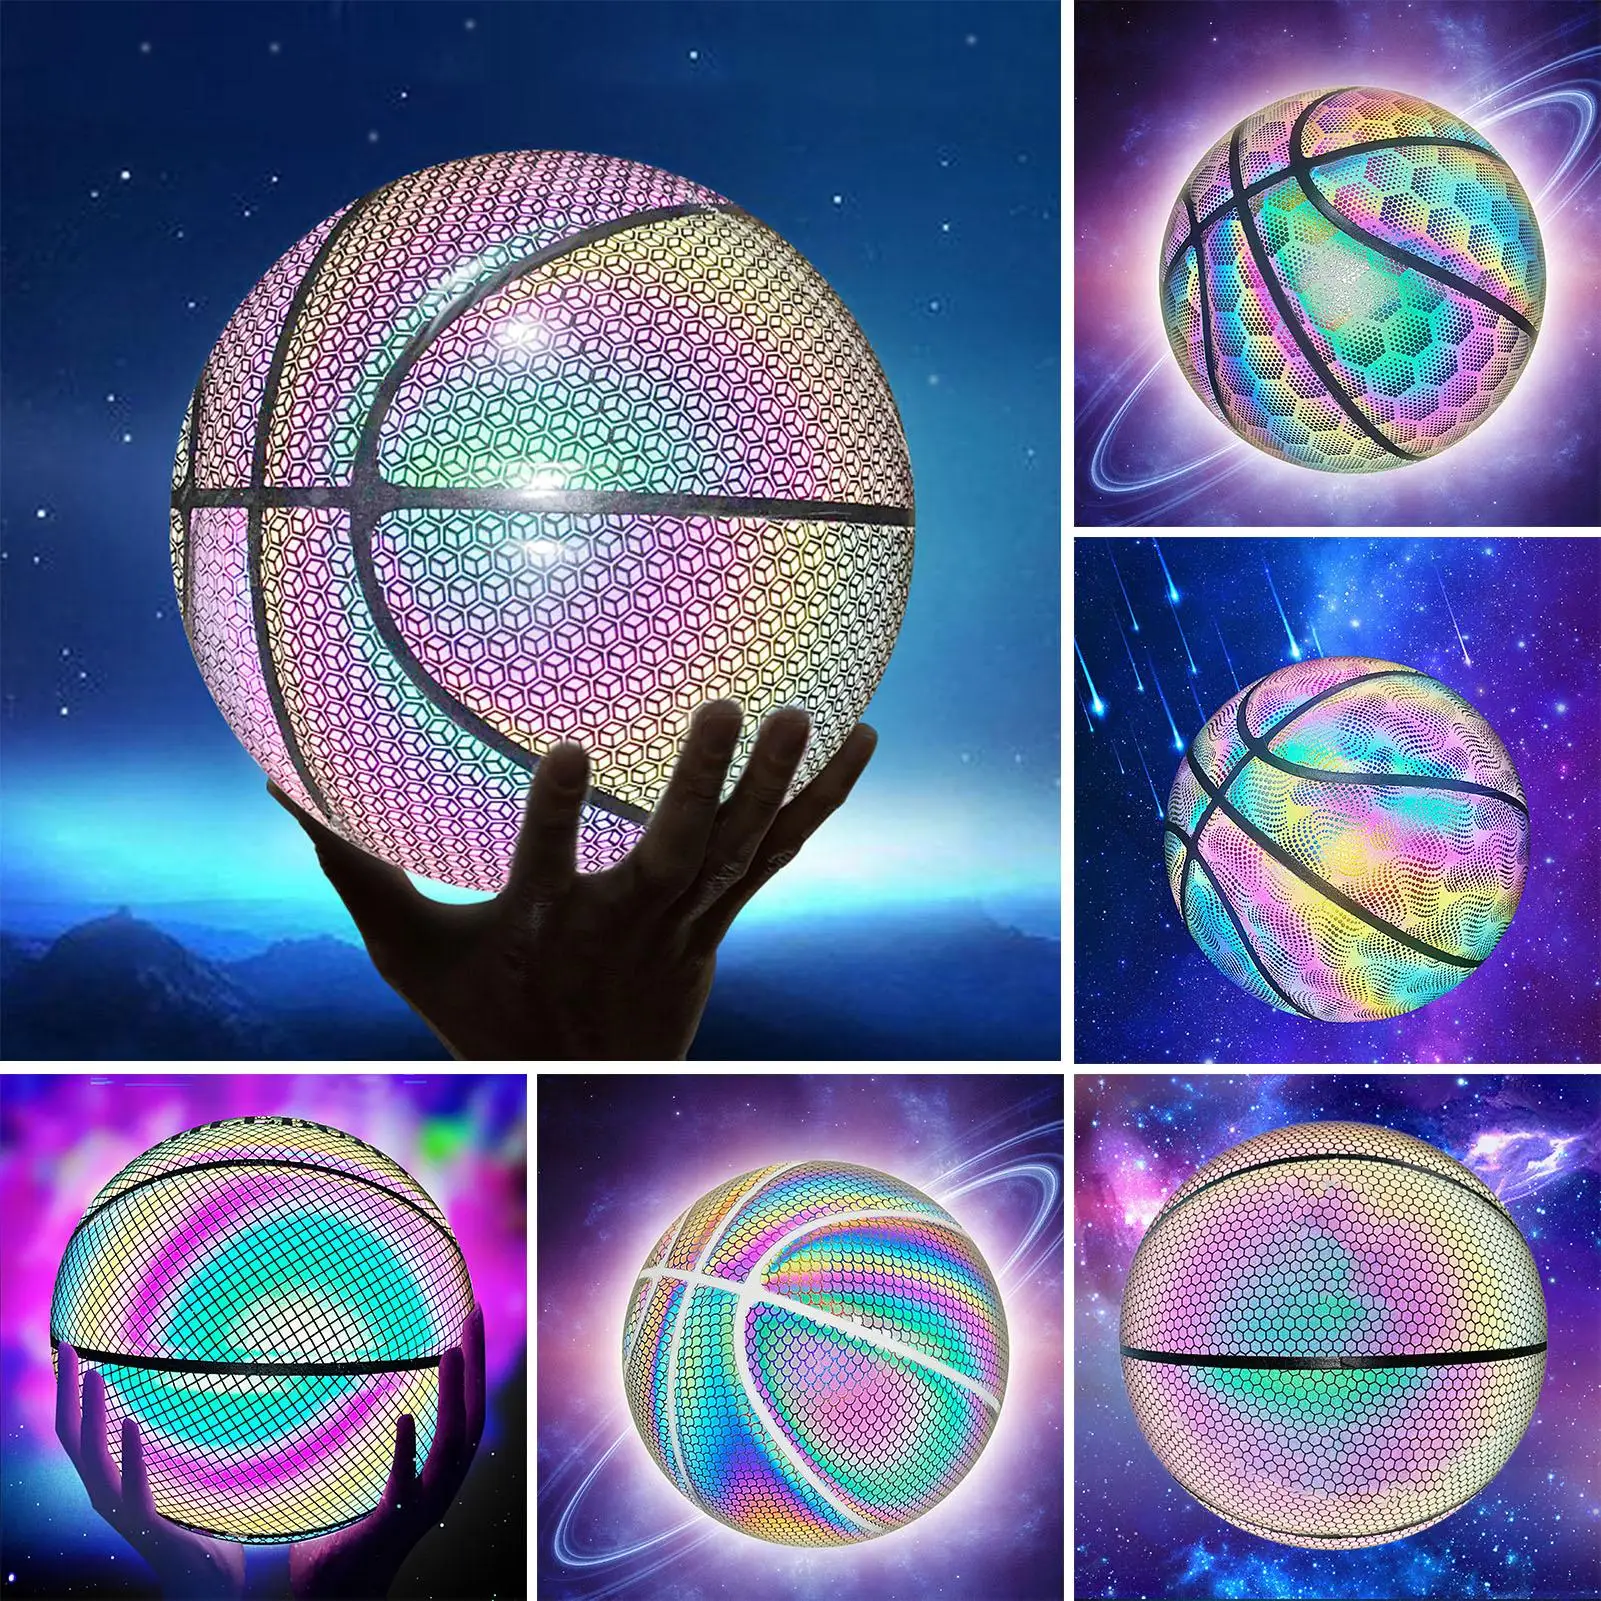 Luminous Basketball Ball Holographic Reflective Lighted Flash Ball PU Wear-Resistant Glowing Basketball Night Sports Game kids images - 6